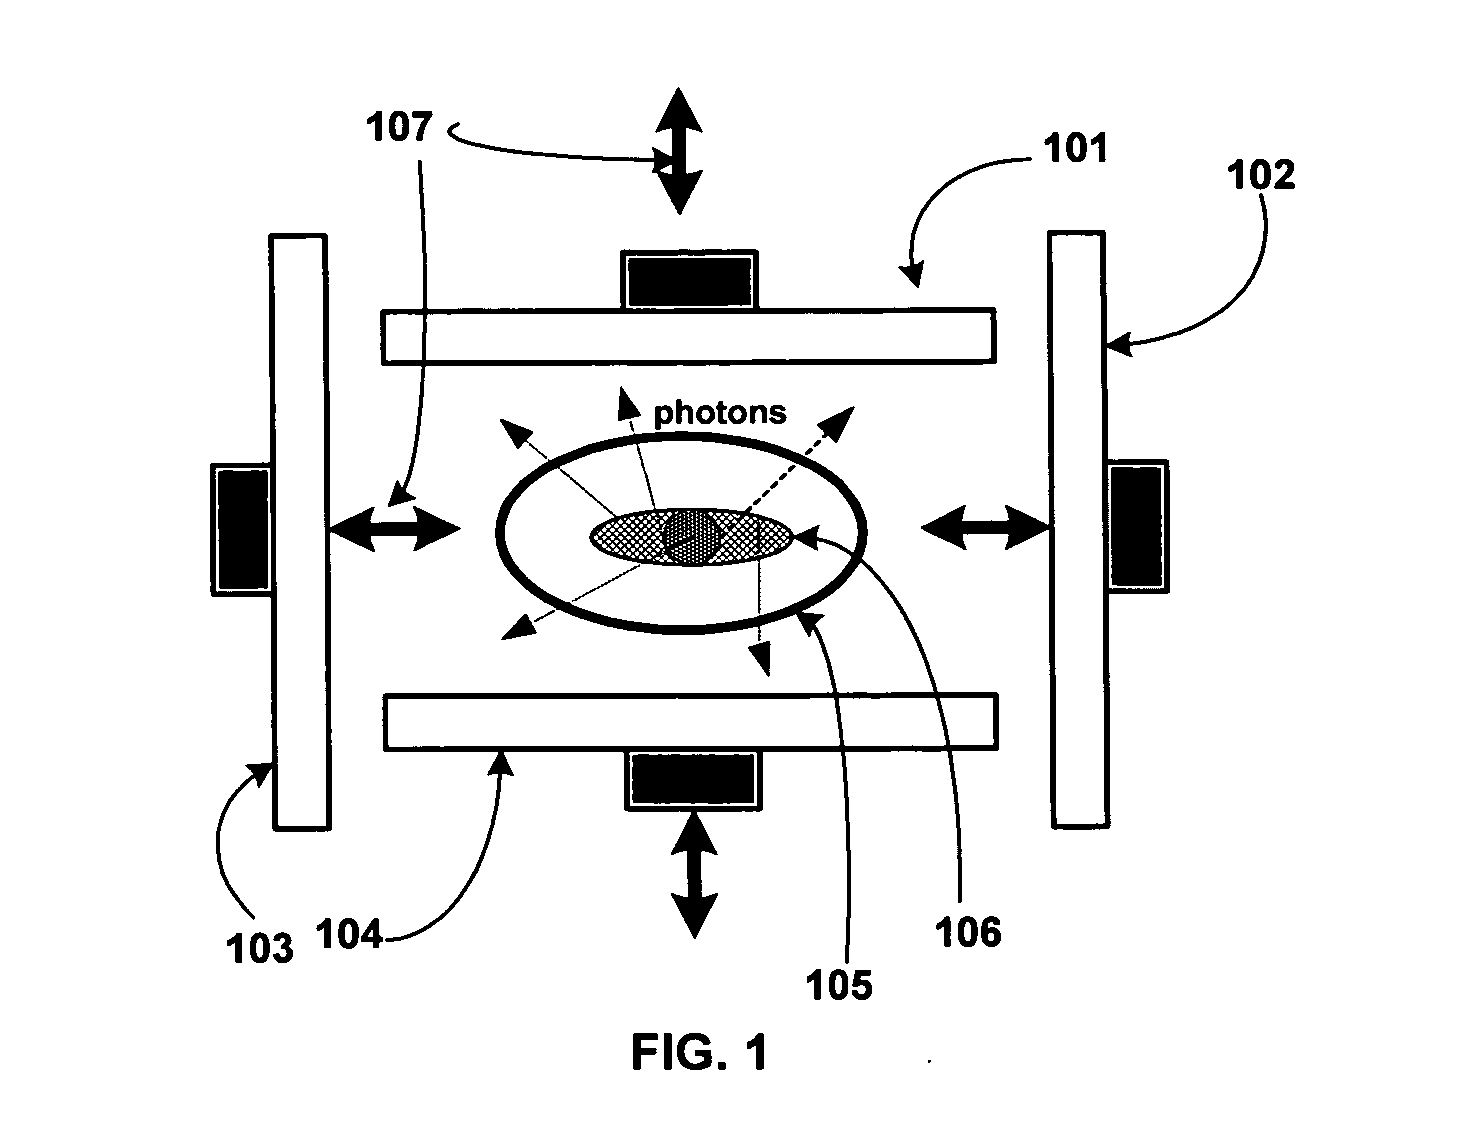 Method and apparatus for high-sensitivity Single-Photon Emission Computed Tomography